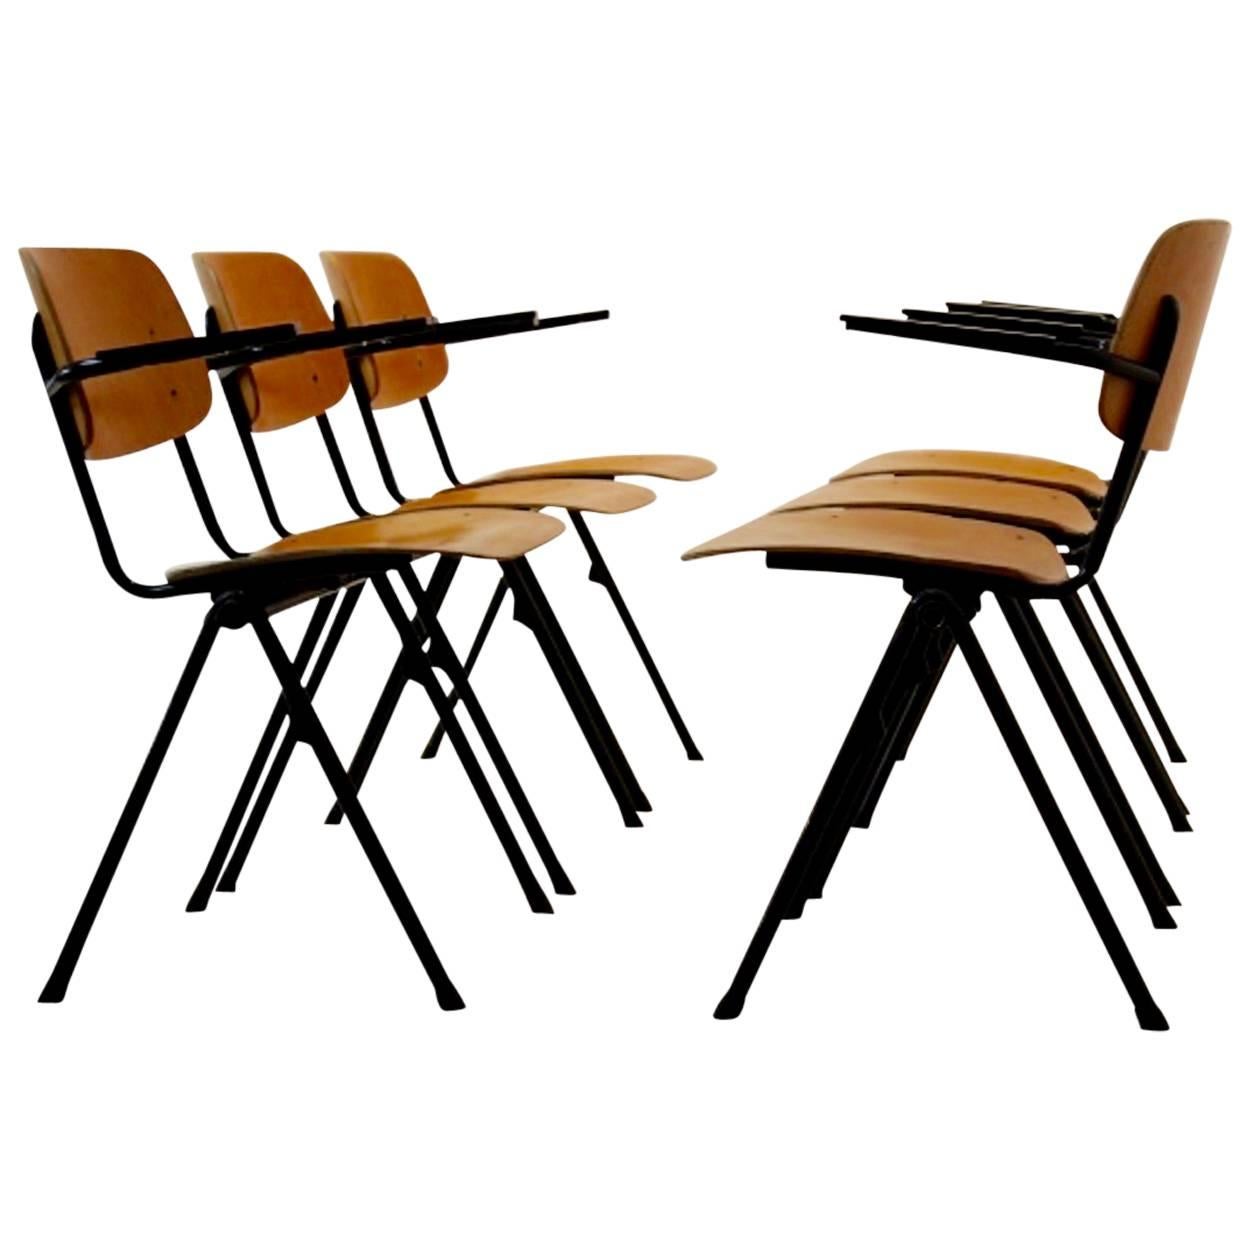 Industrial Plywood Marko School Chairs, Netherlands, 1960s